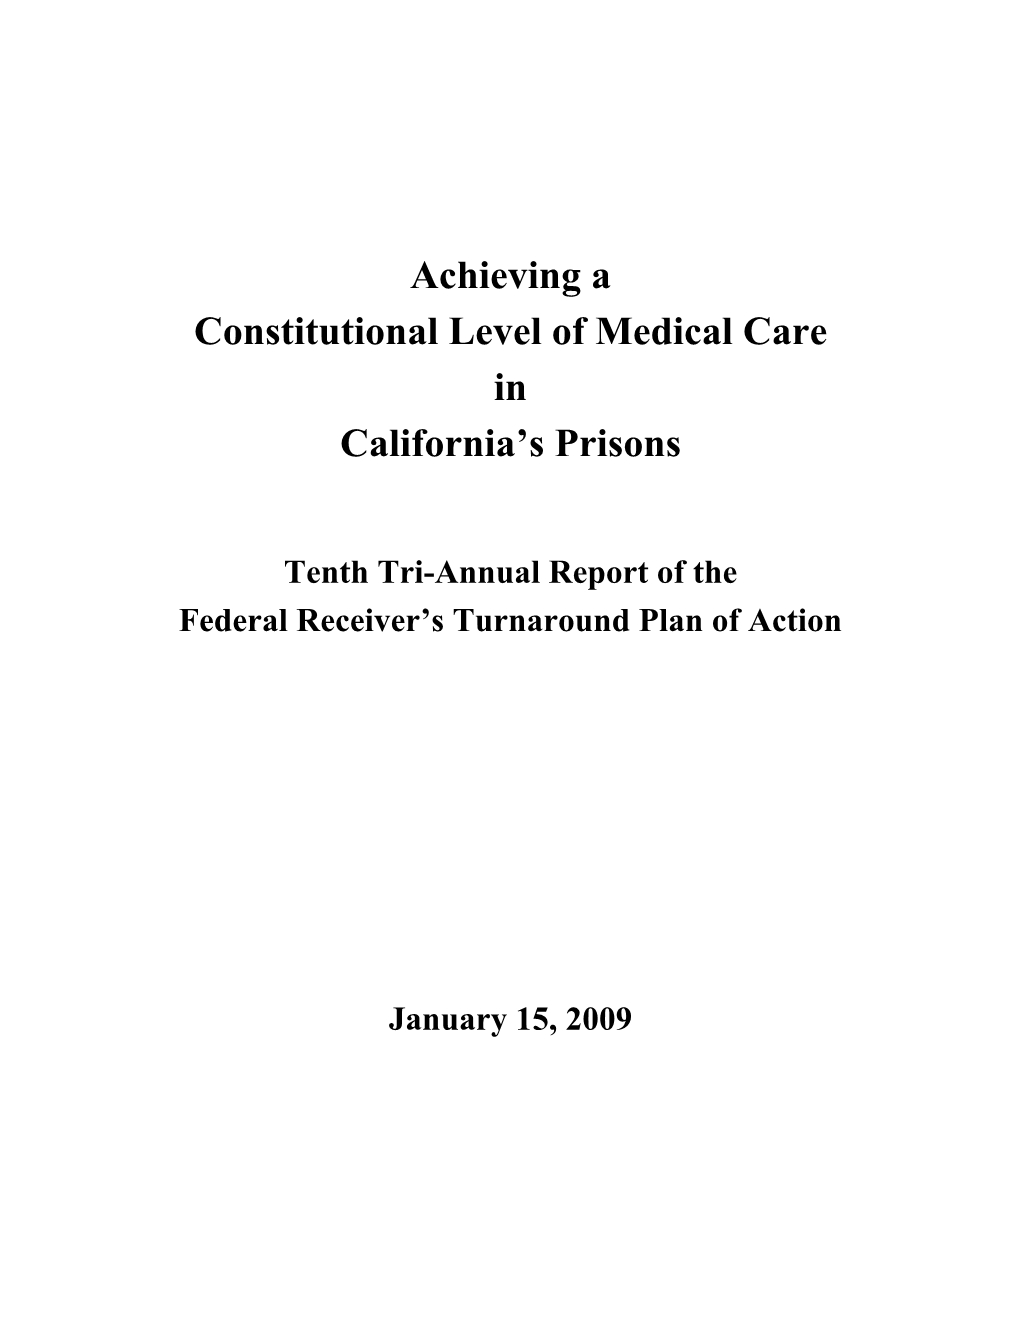 Achieving a Constitutional Level of Medical Care in California's Prisons